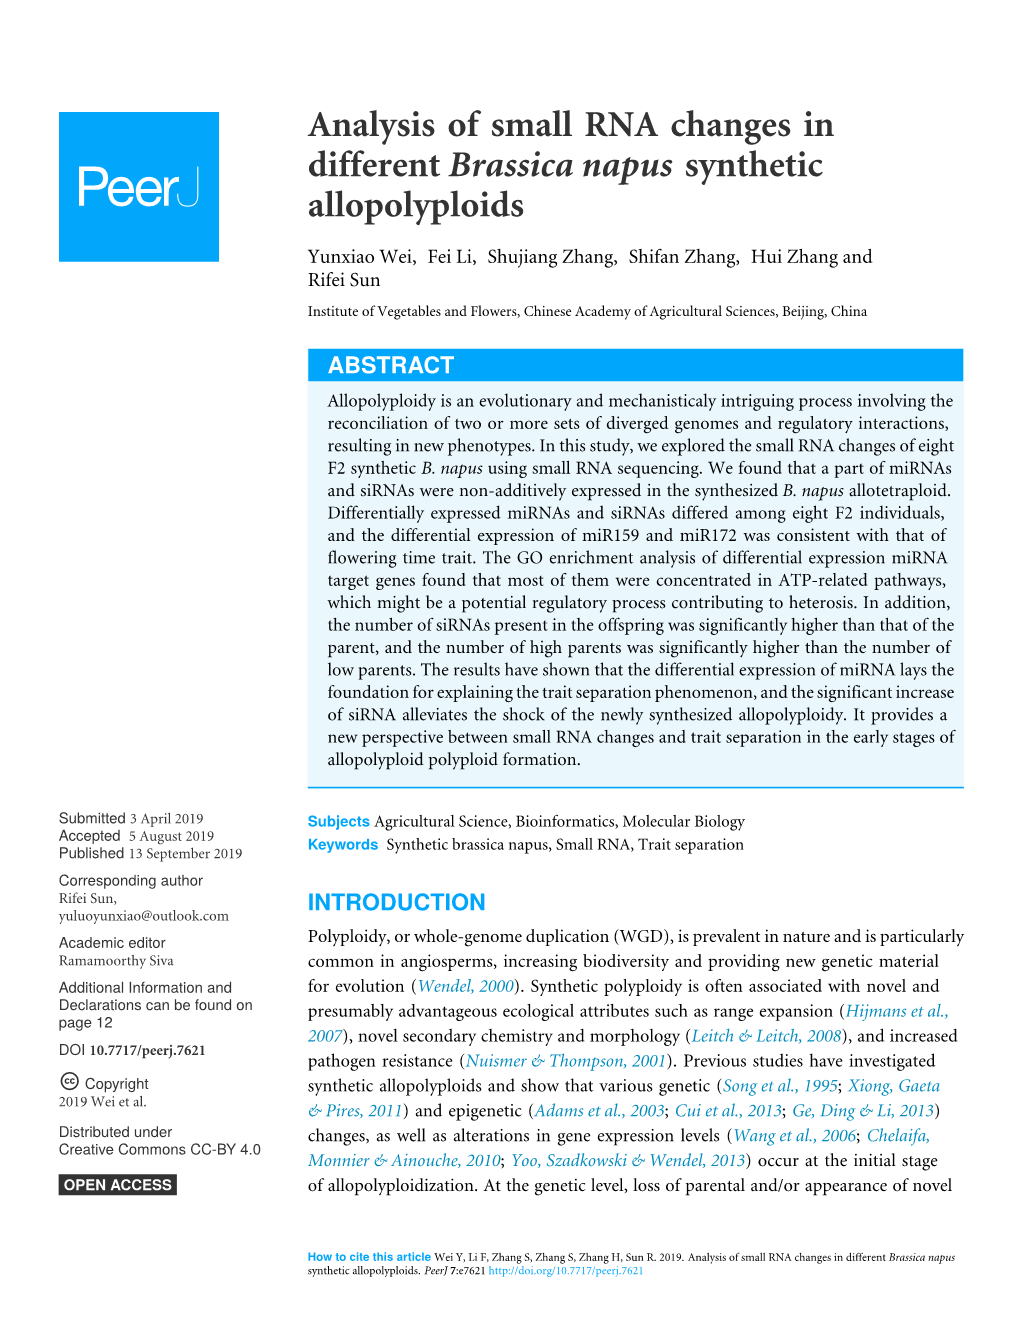 Analysis of Small RNA Changes in Different Brassica Napus Synthetic Allopolyploids